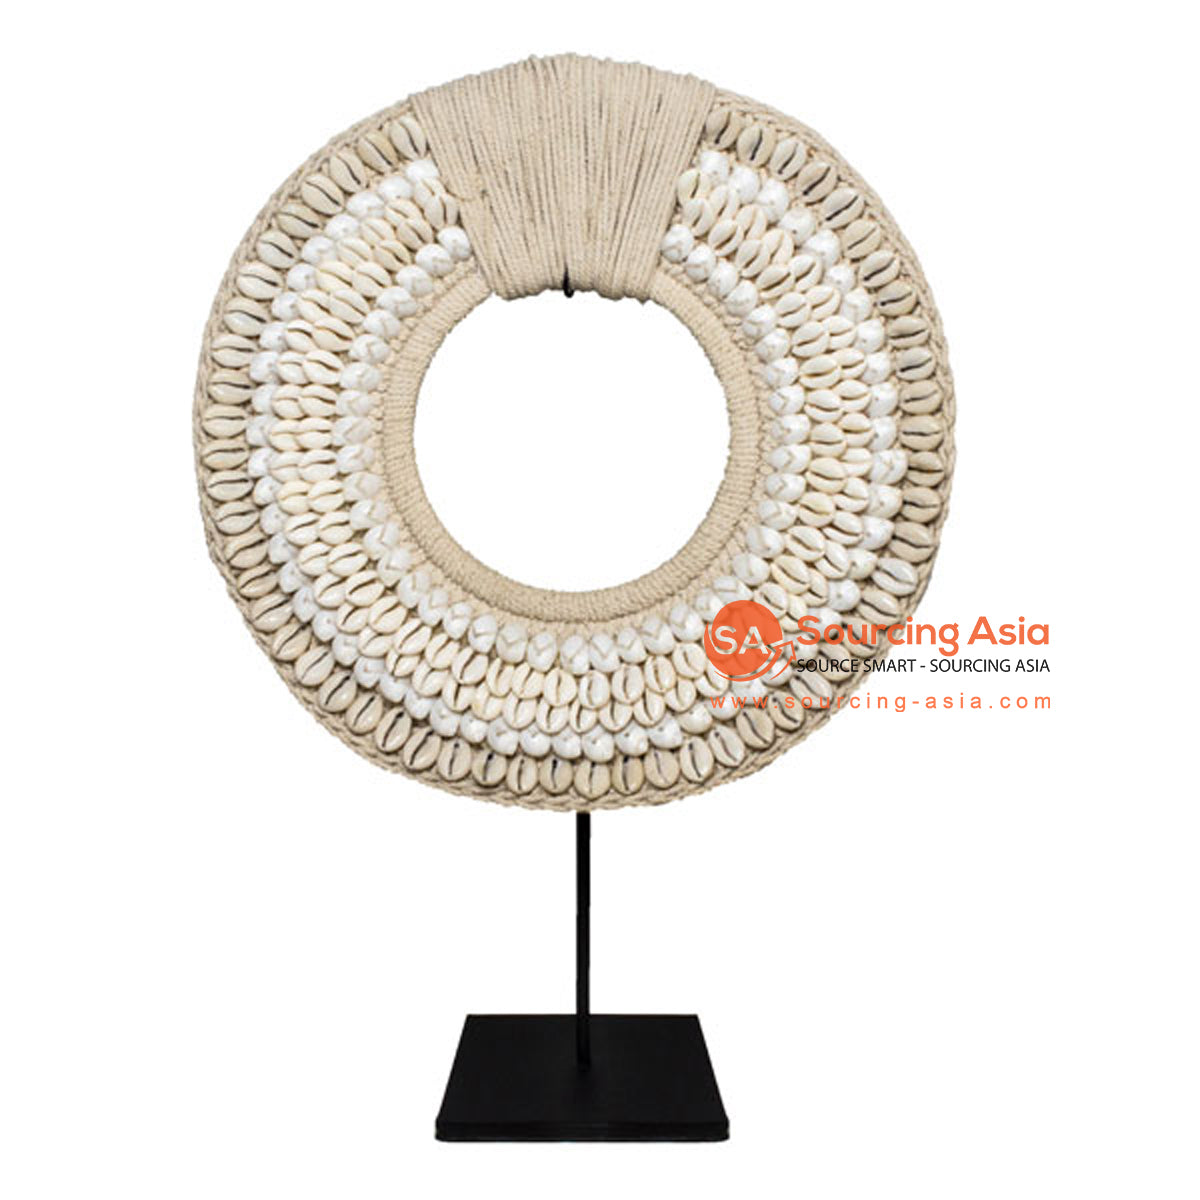 SHL169-3 NATURAL SHELL NECKLACE ON STAND DECORATION